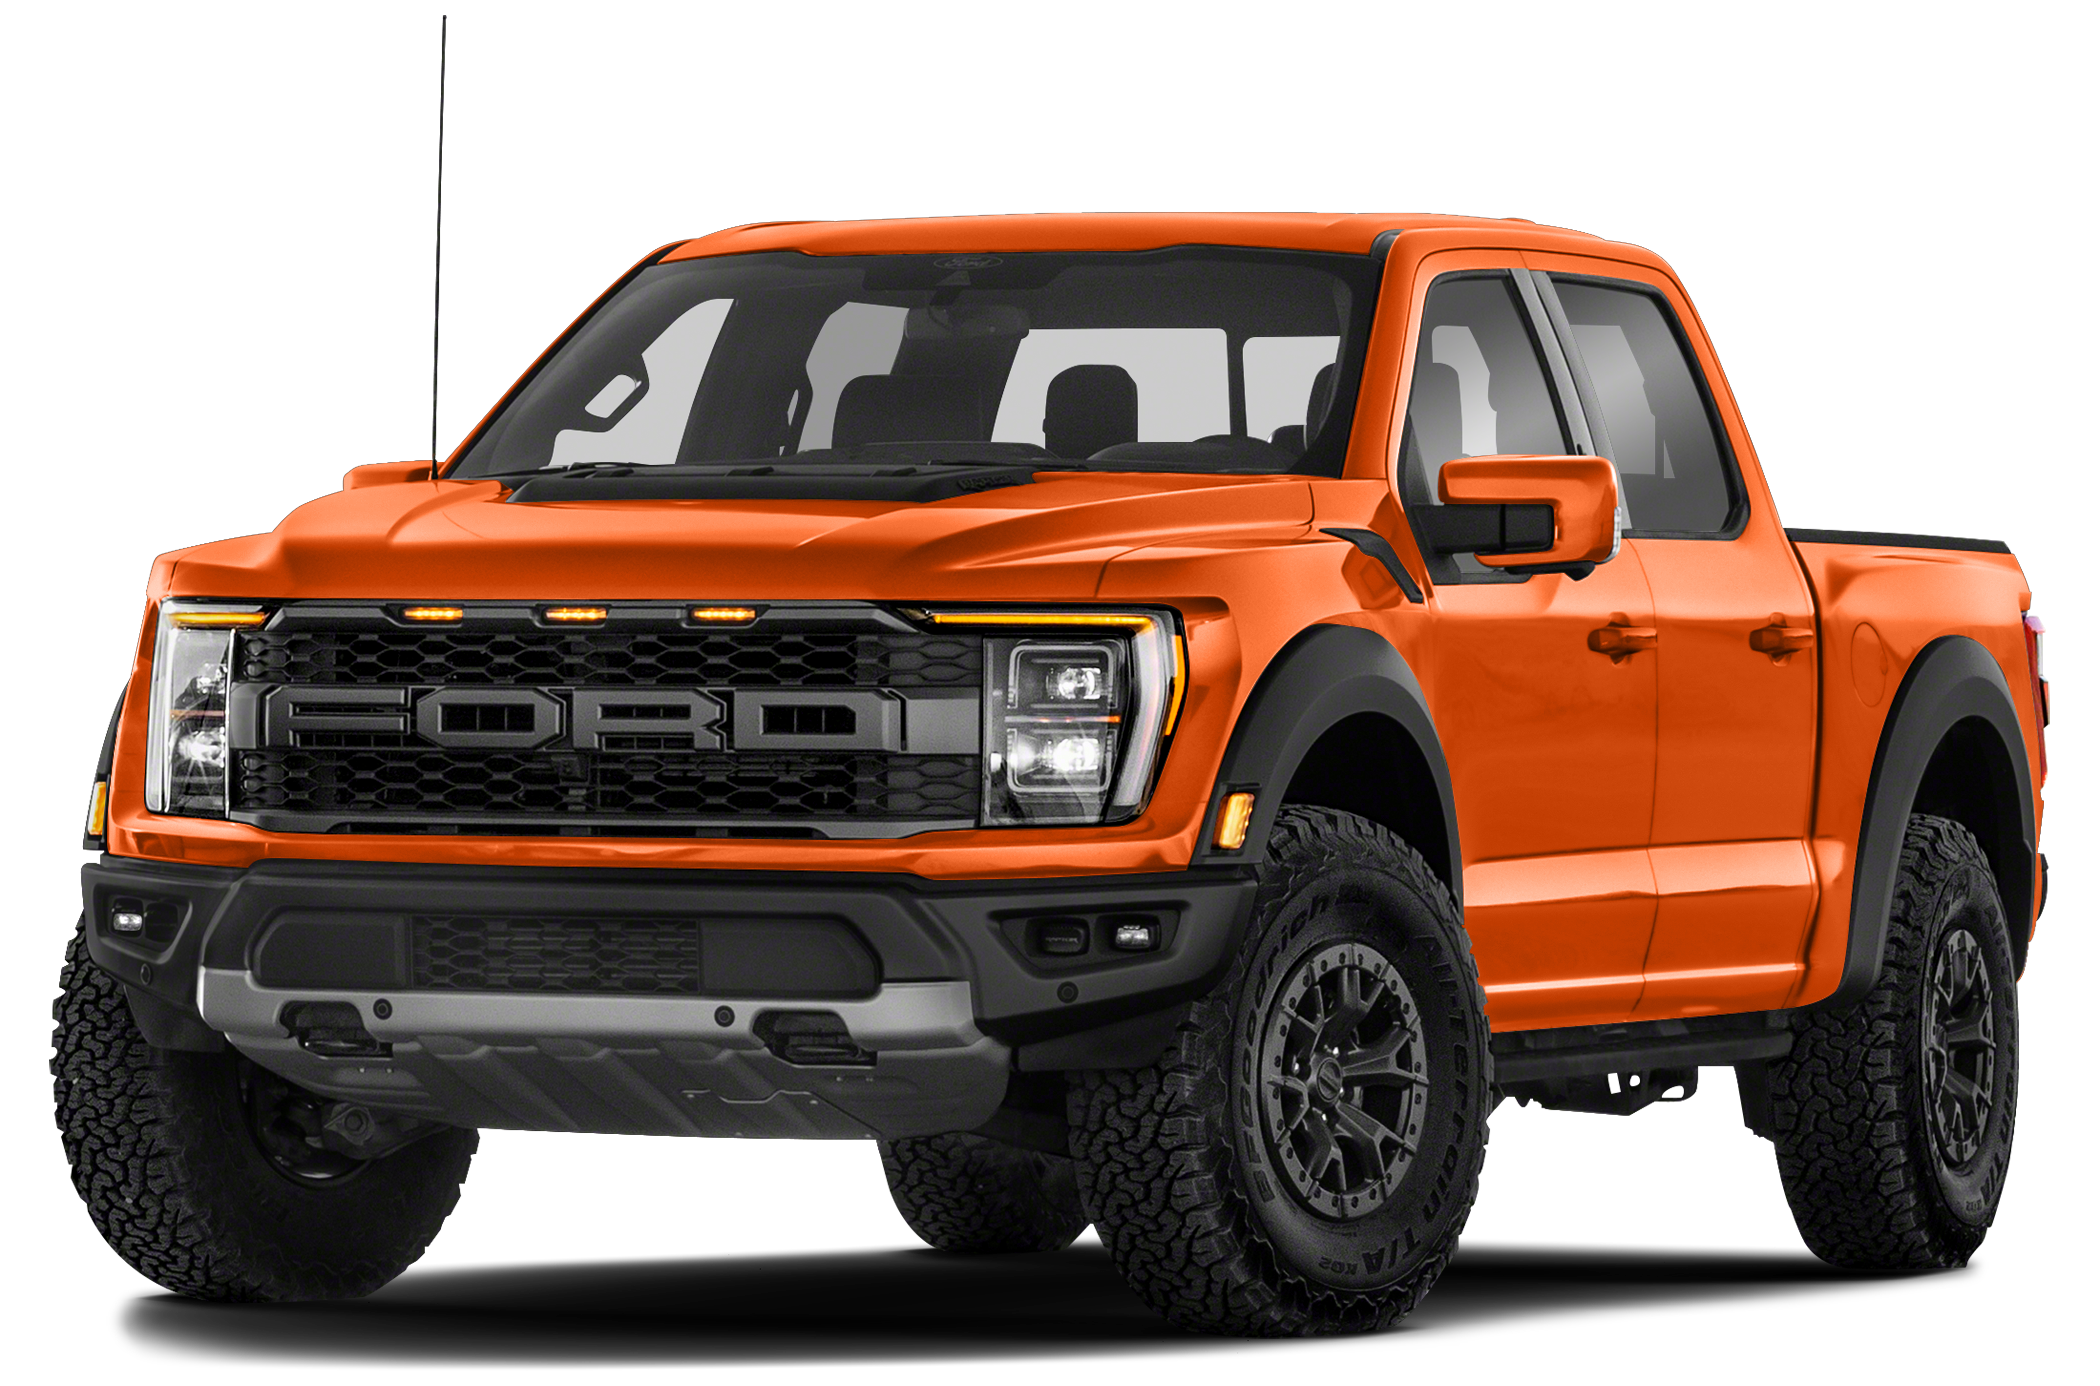 Used 2021 Ford F-150 Trucks for Sale in Chatsworth, GA | Cars.com